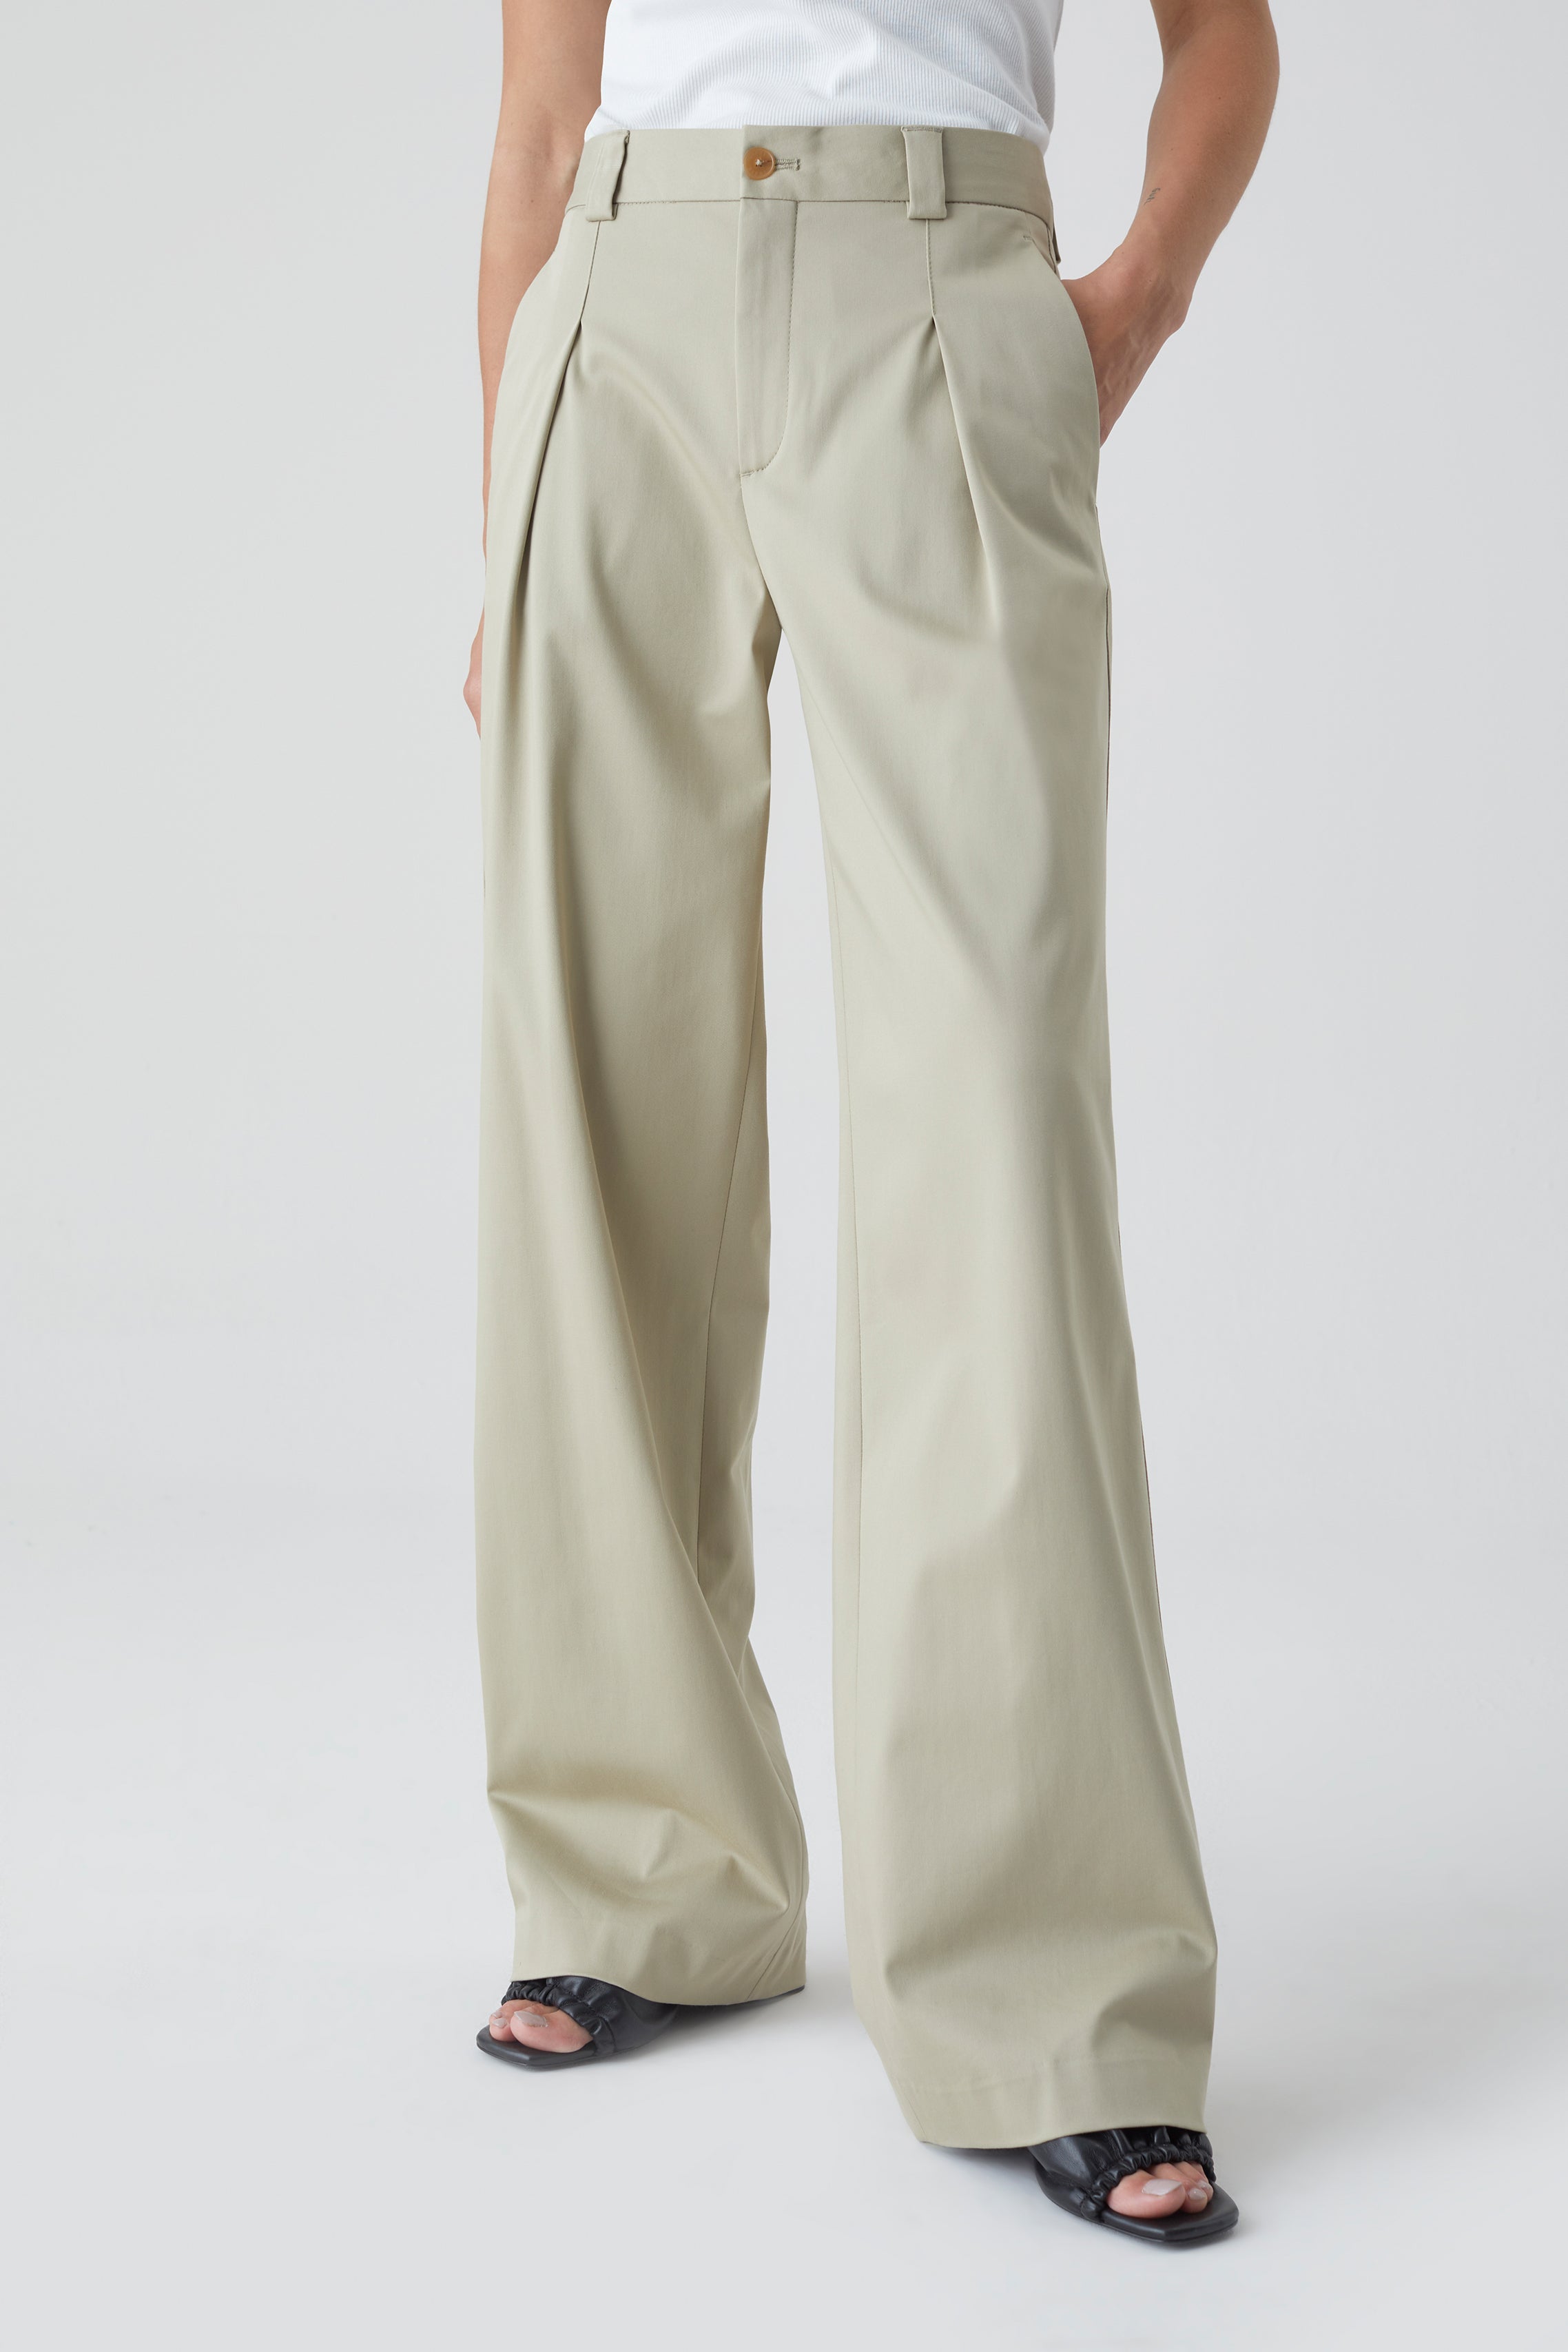 CLOSED-OUTLET-SALE-STYLE-NAME-BROOKS-PANTS-Hosen-ARCHIVE-COLLECTION_57939317-a3db-4801-b835-b848a6393bbe.jpg